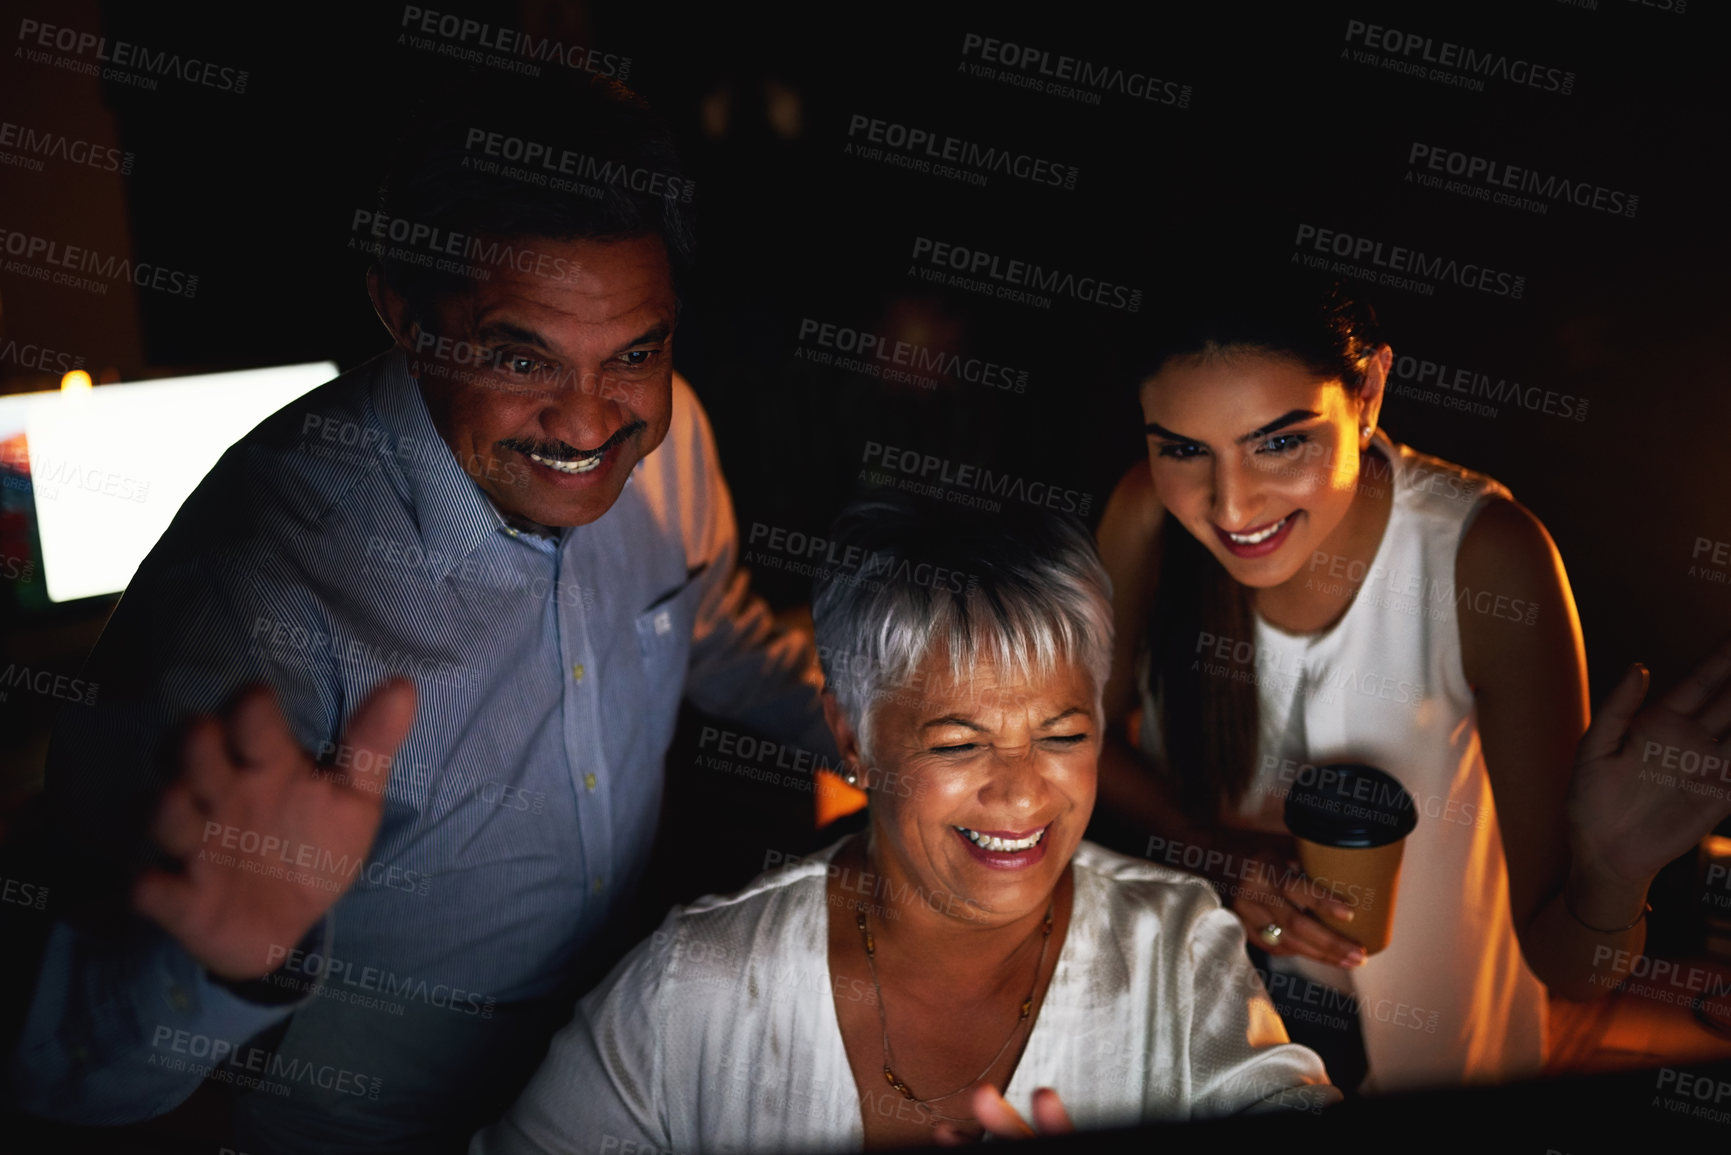 Buy stock photo Shot of a group of colleagues waving while making a video call on a computer at night in an office